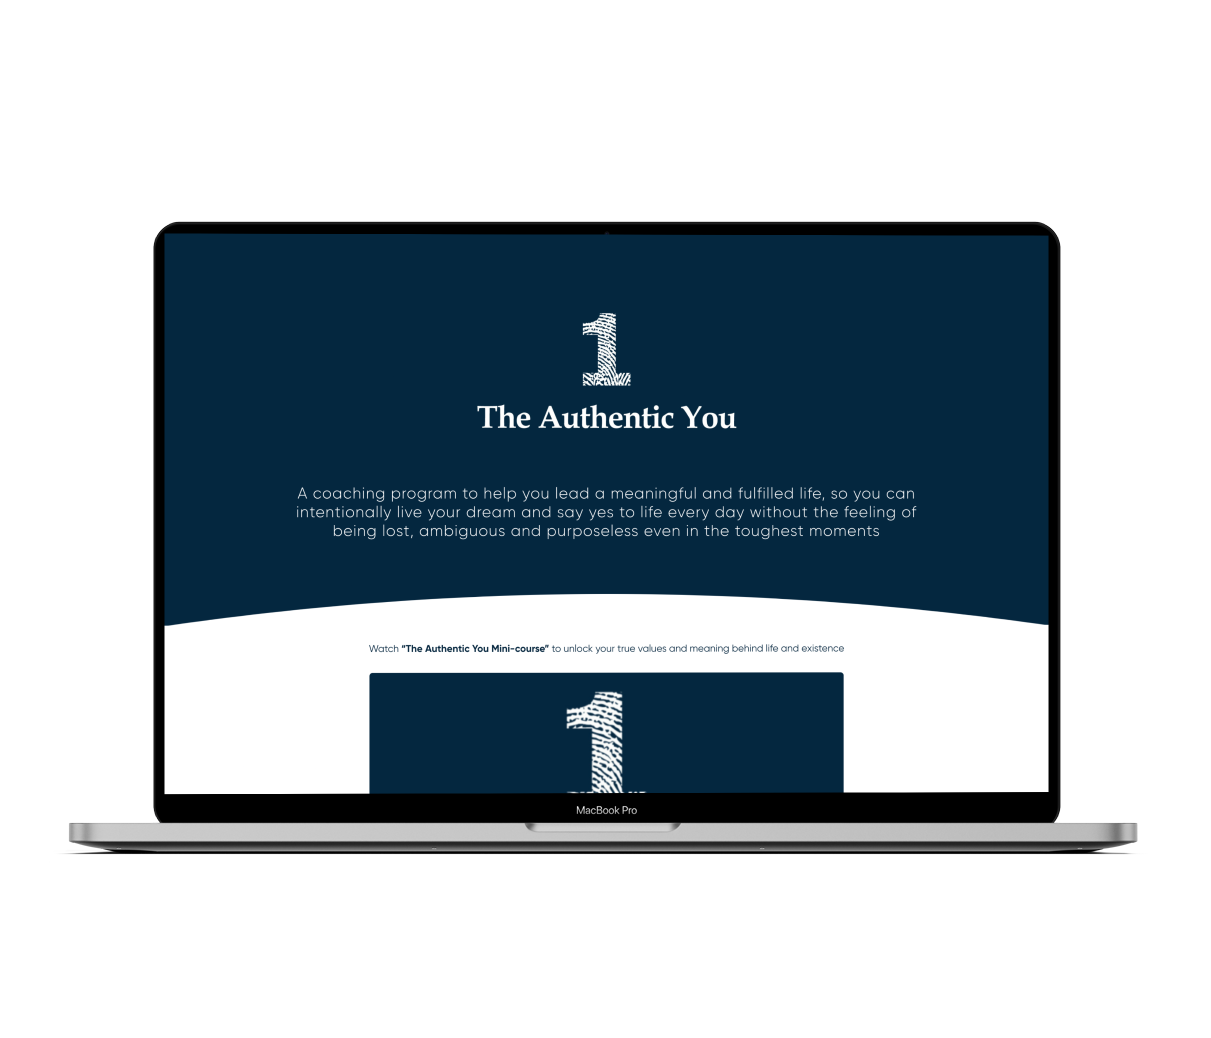 The authentic you webinar landing page